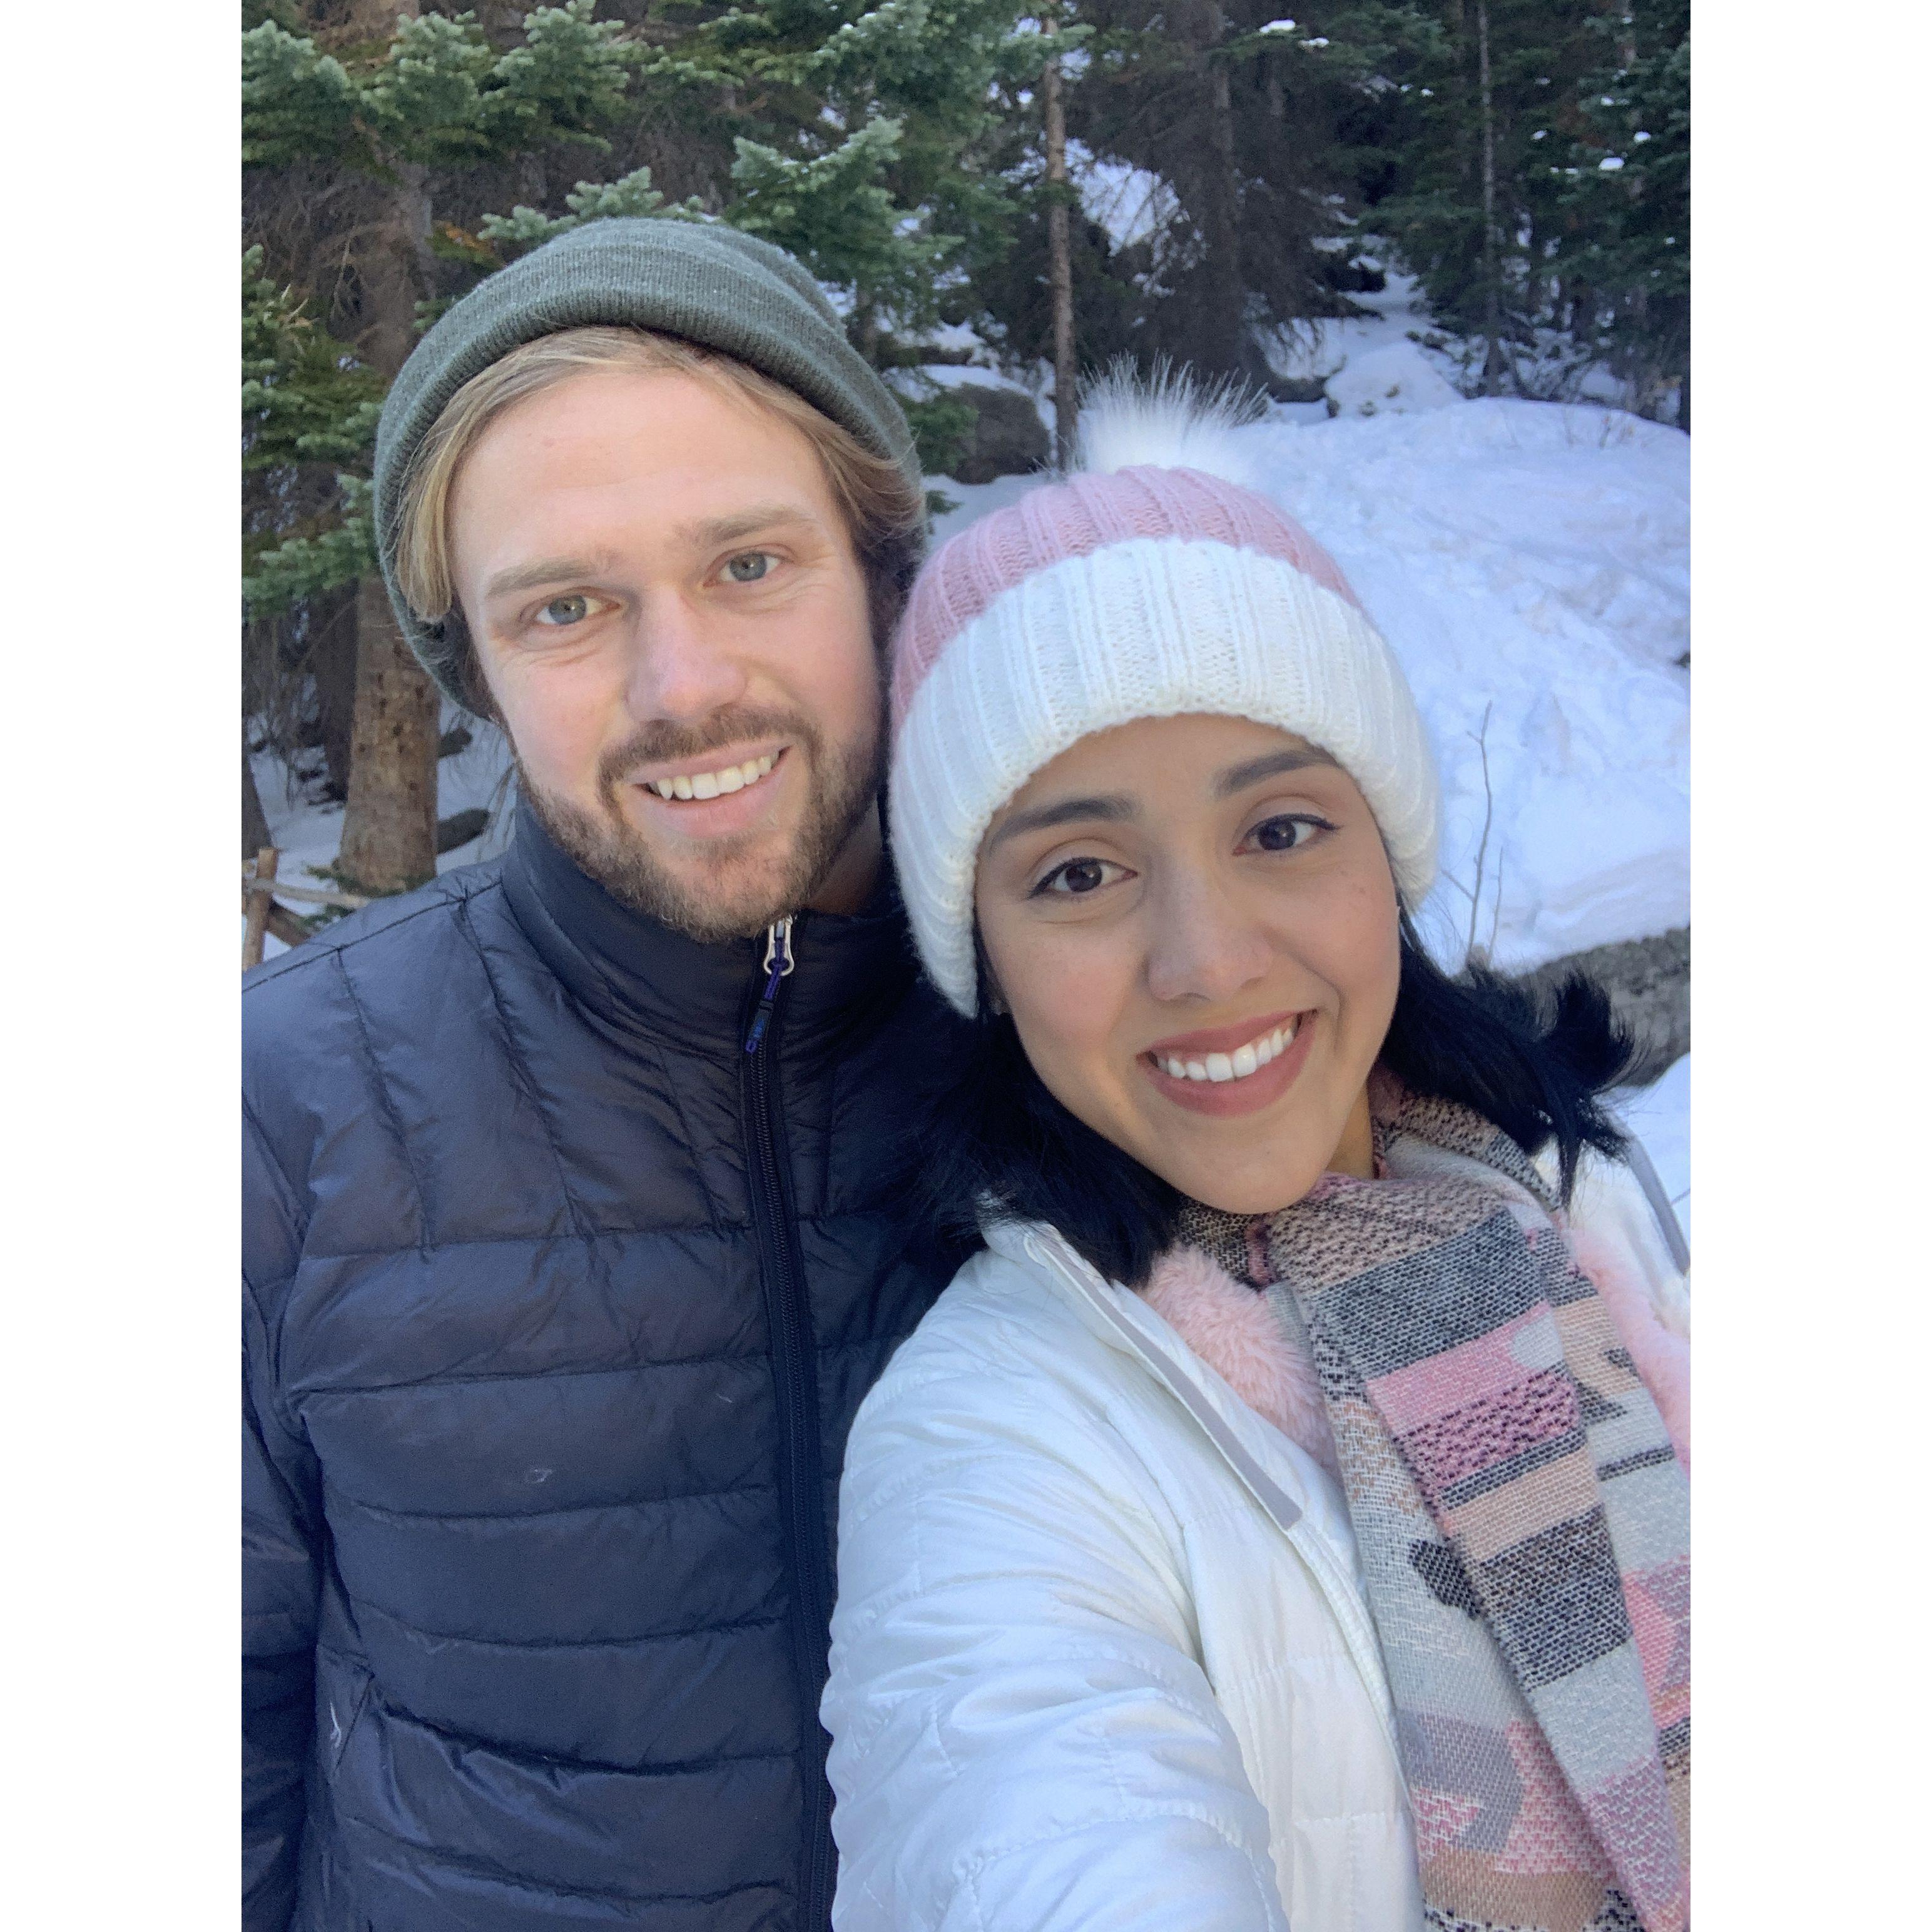 Kicking off our first holiday season together with a hike in Estes Park, Colorado. November 2021.